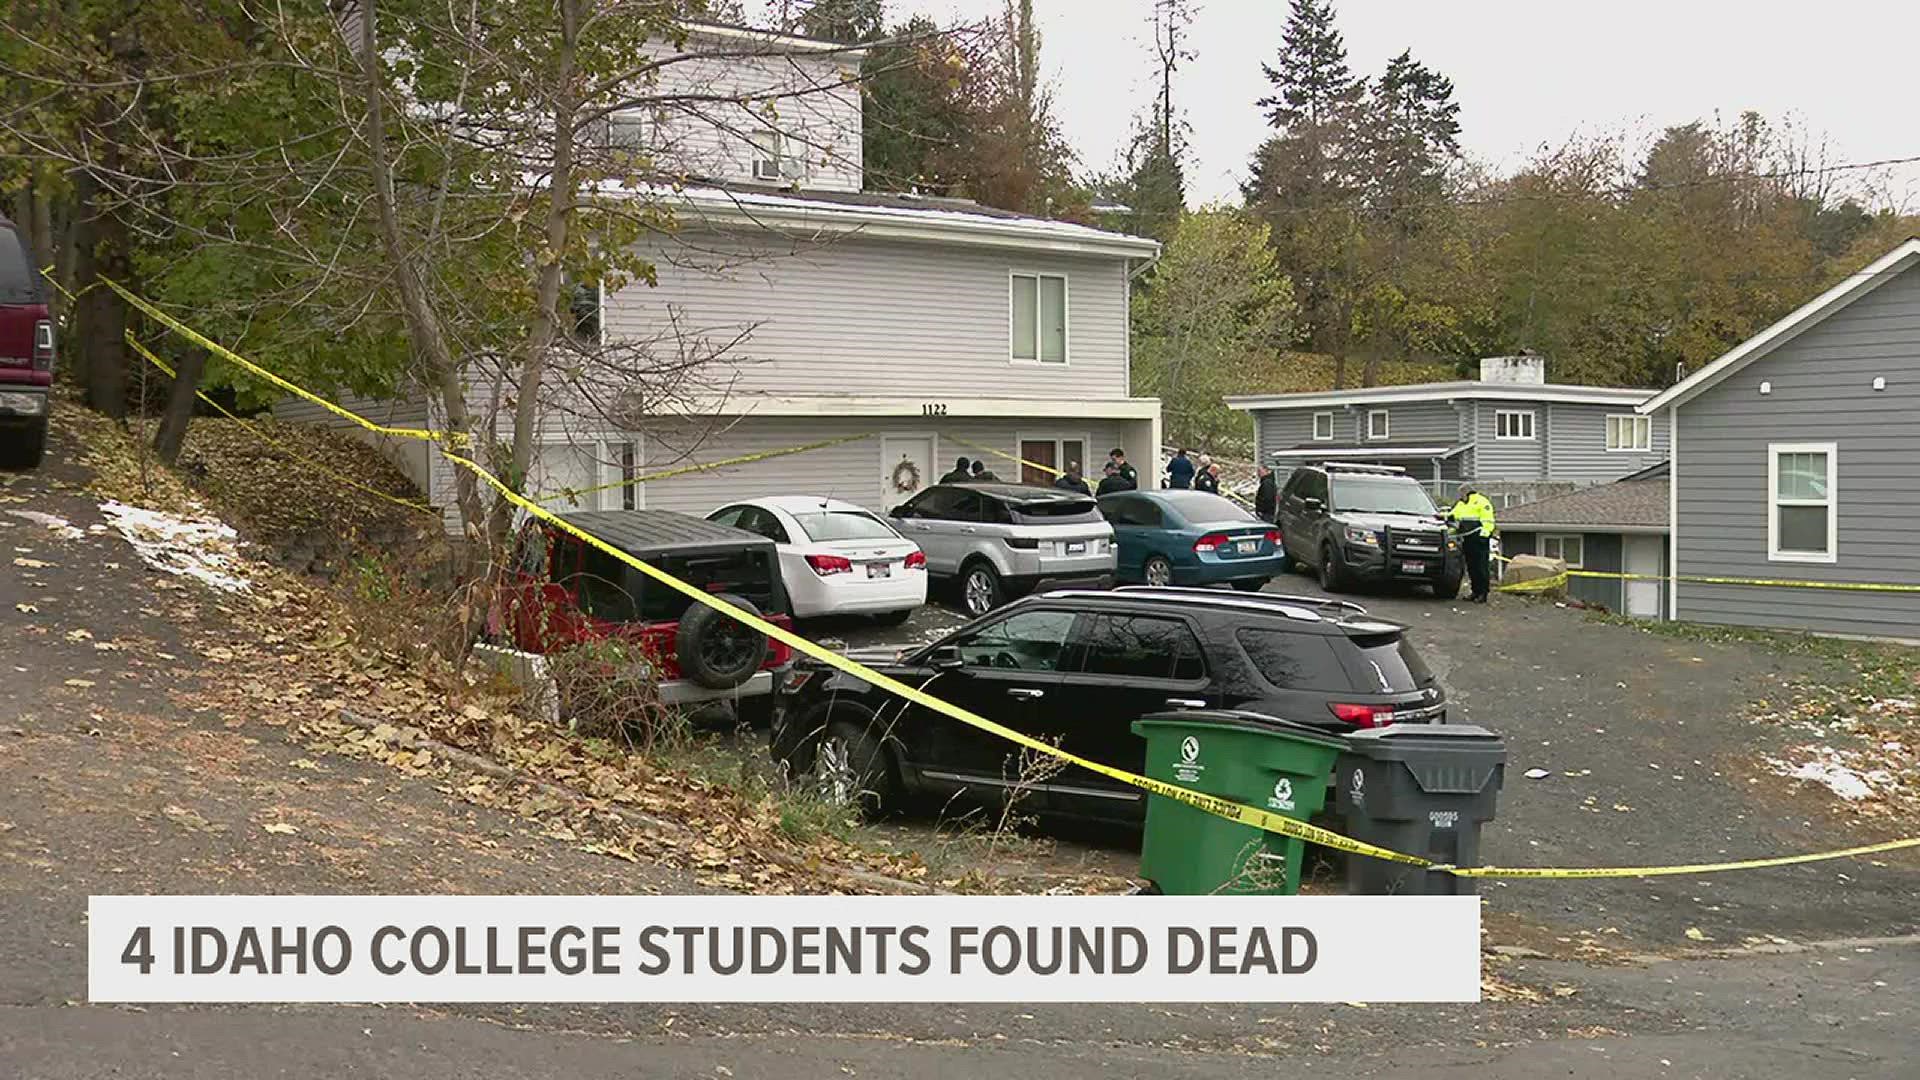 The community of Moscow, Idaho is shaken after four University of Idaho students were found dead off campus.